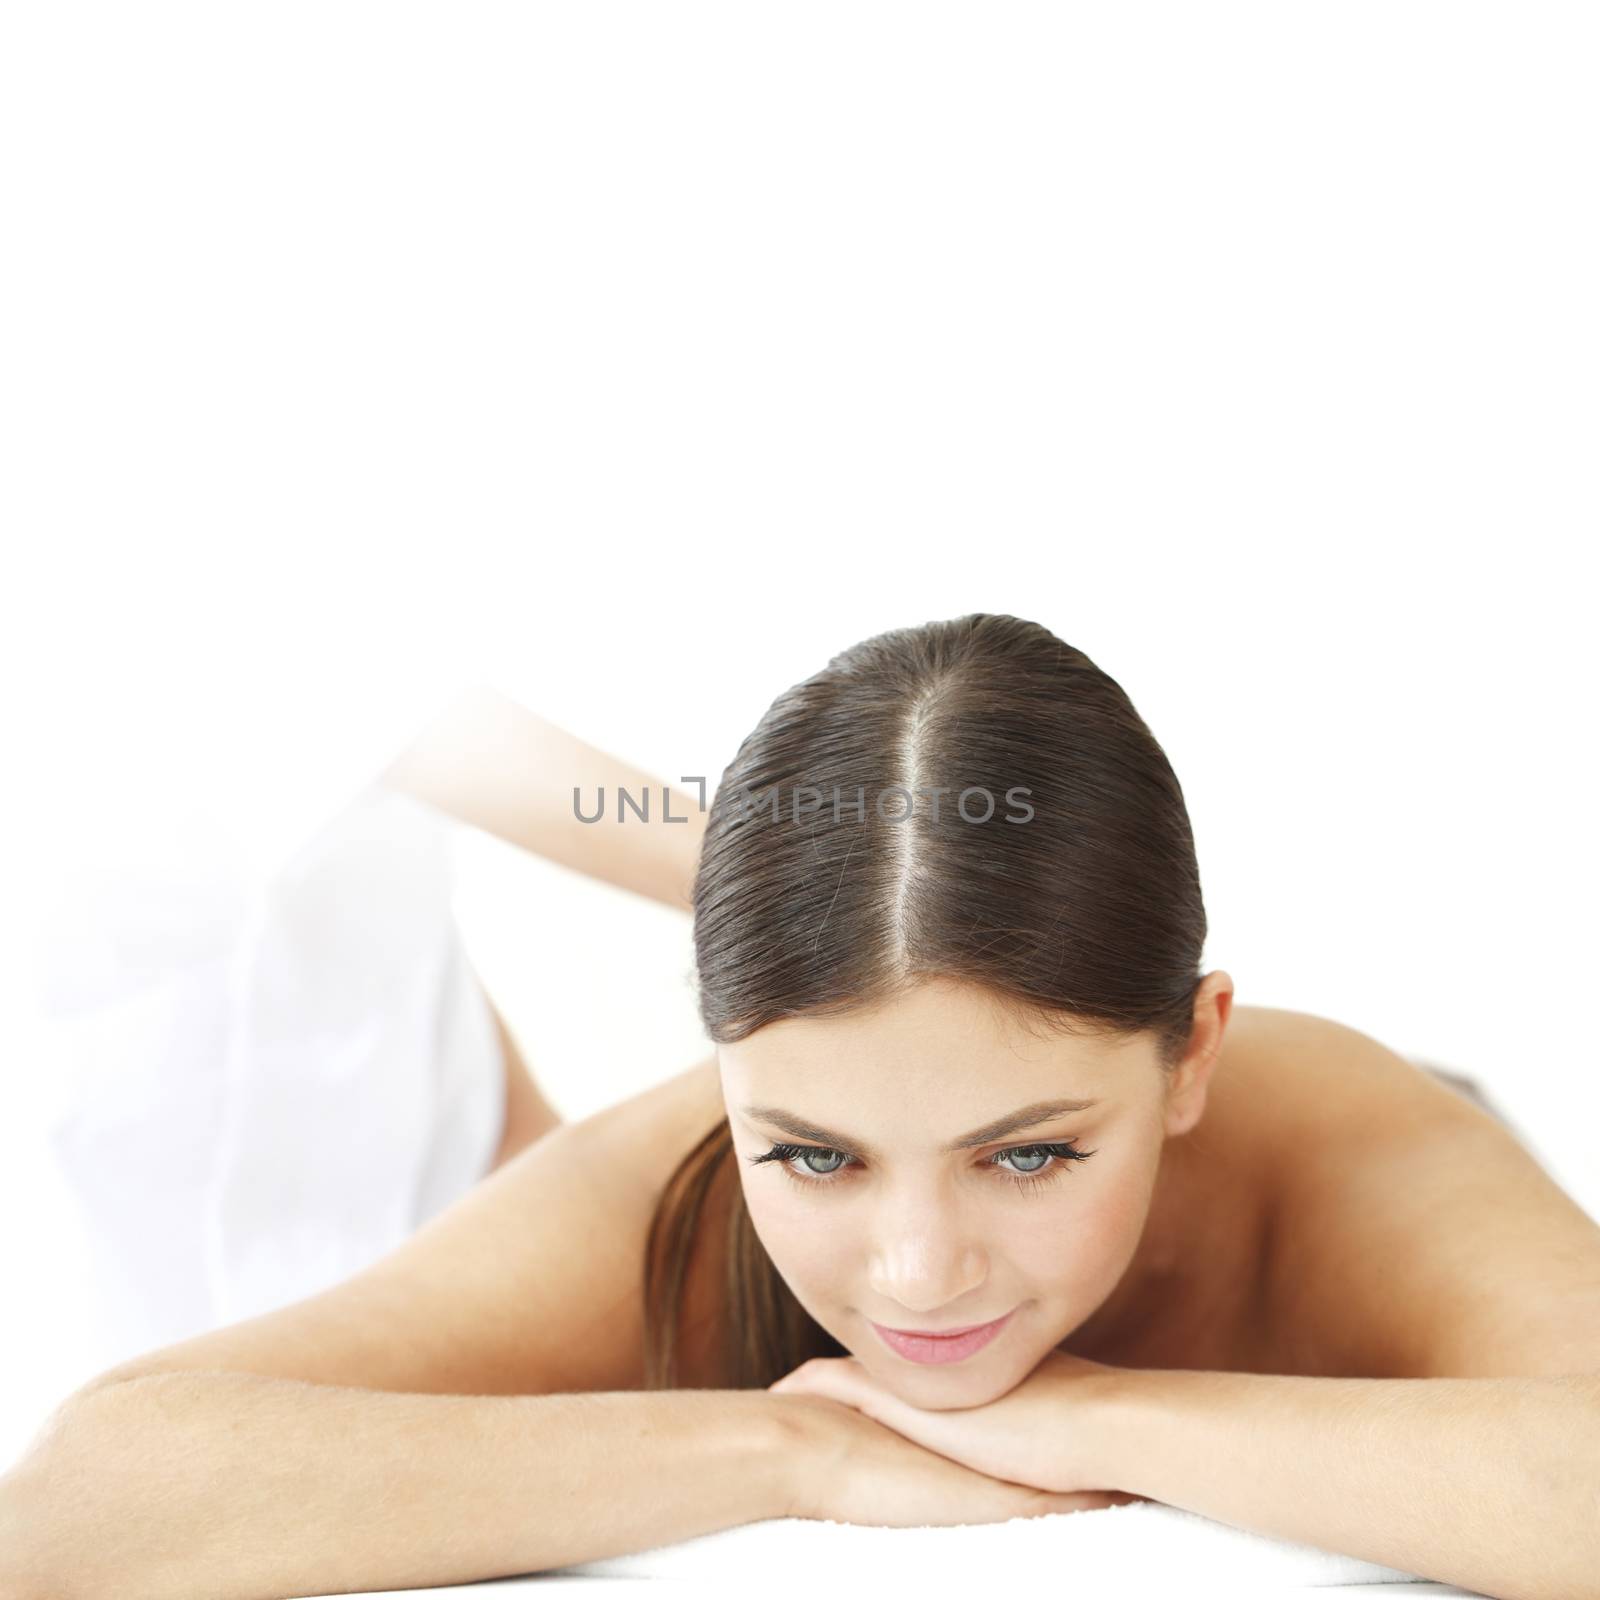 Smiling woman enjoying massage in a spa center